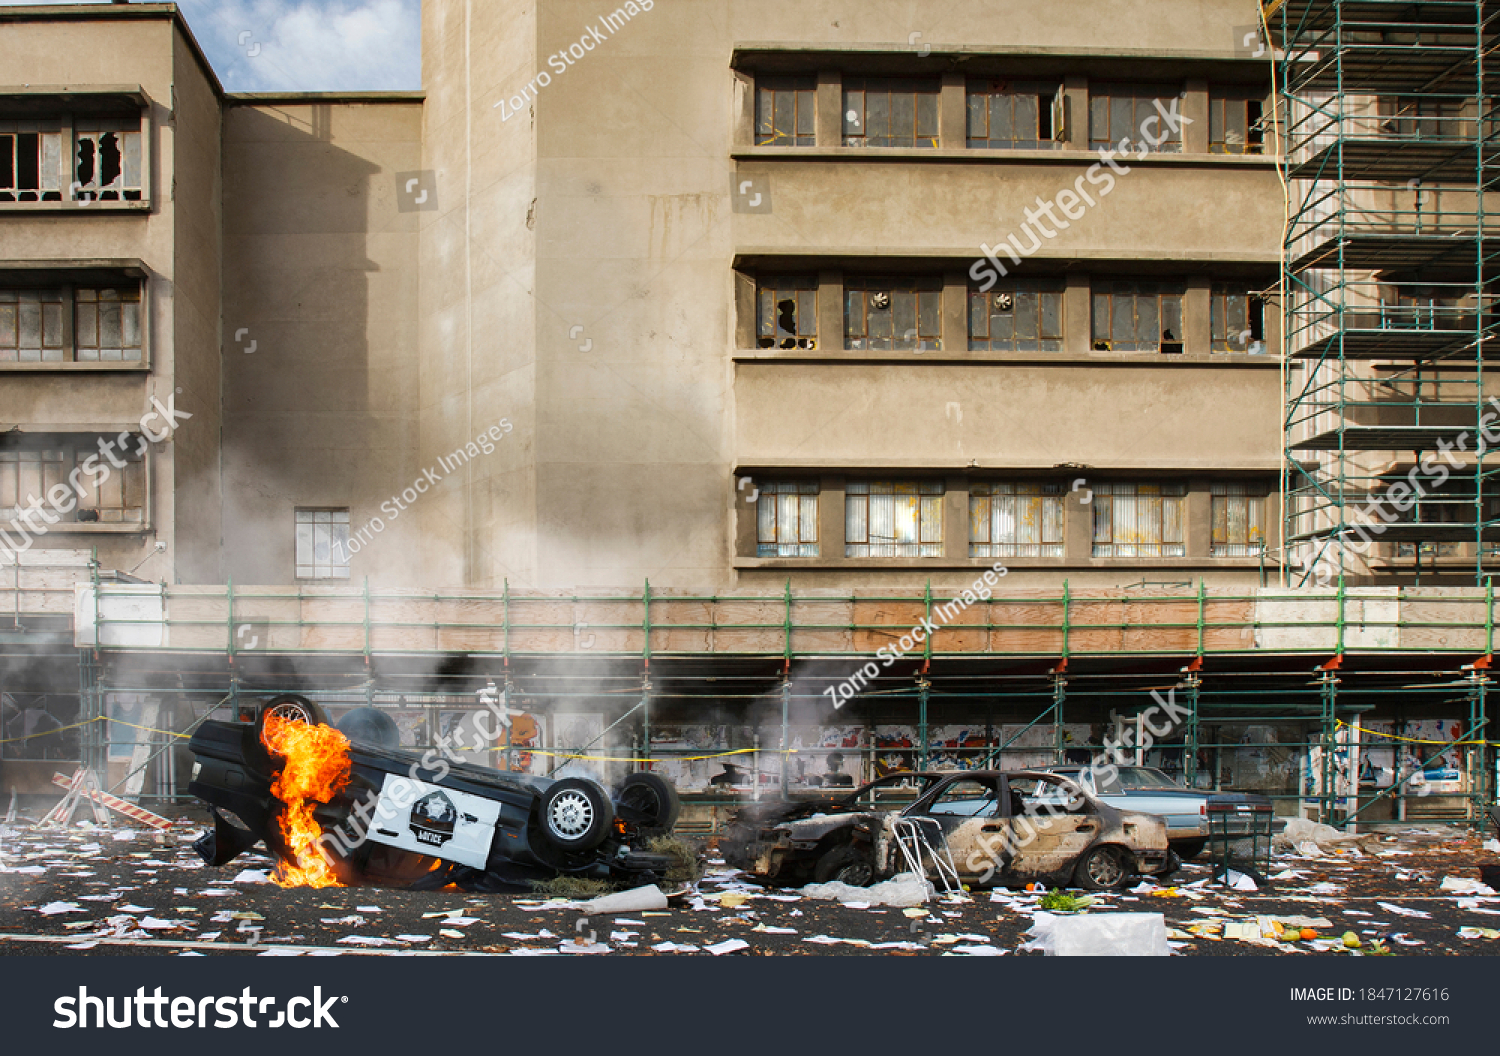 American riots and protests cause vandalism, looting and destruction, riot aftermath concept, upturned police car smashed on fire, broken windows of abandoned building, total anarchy and lawlessness #1847127616